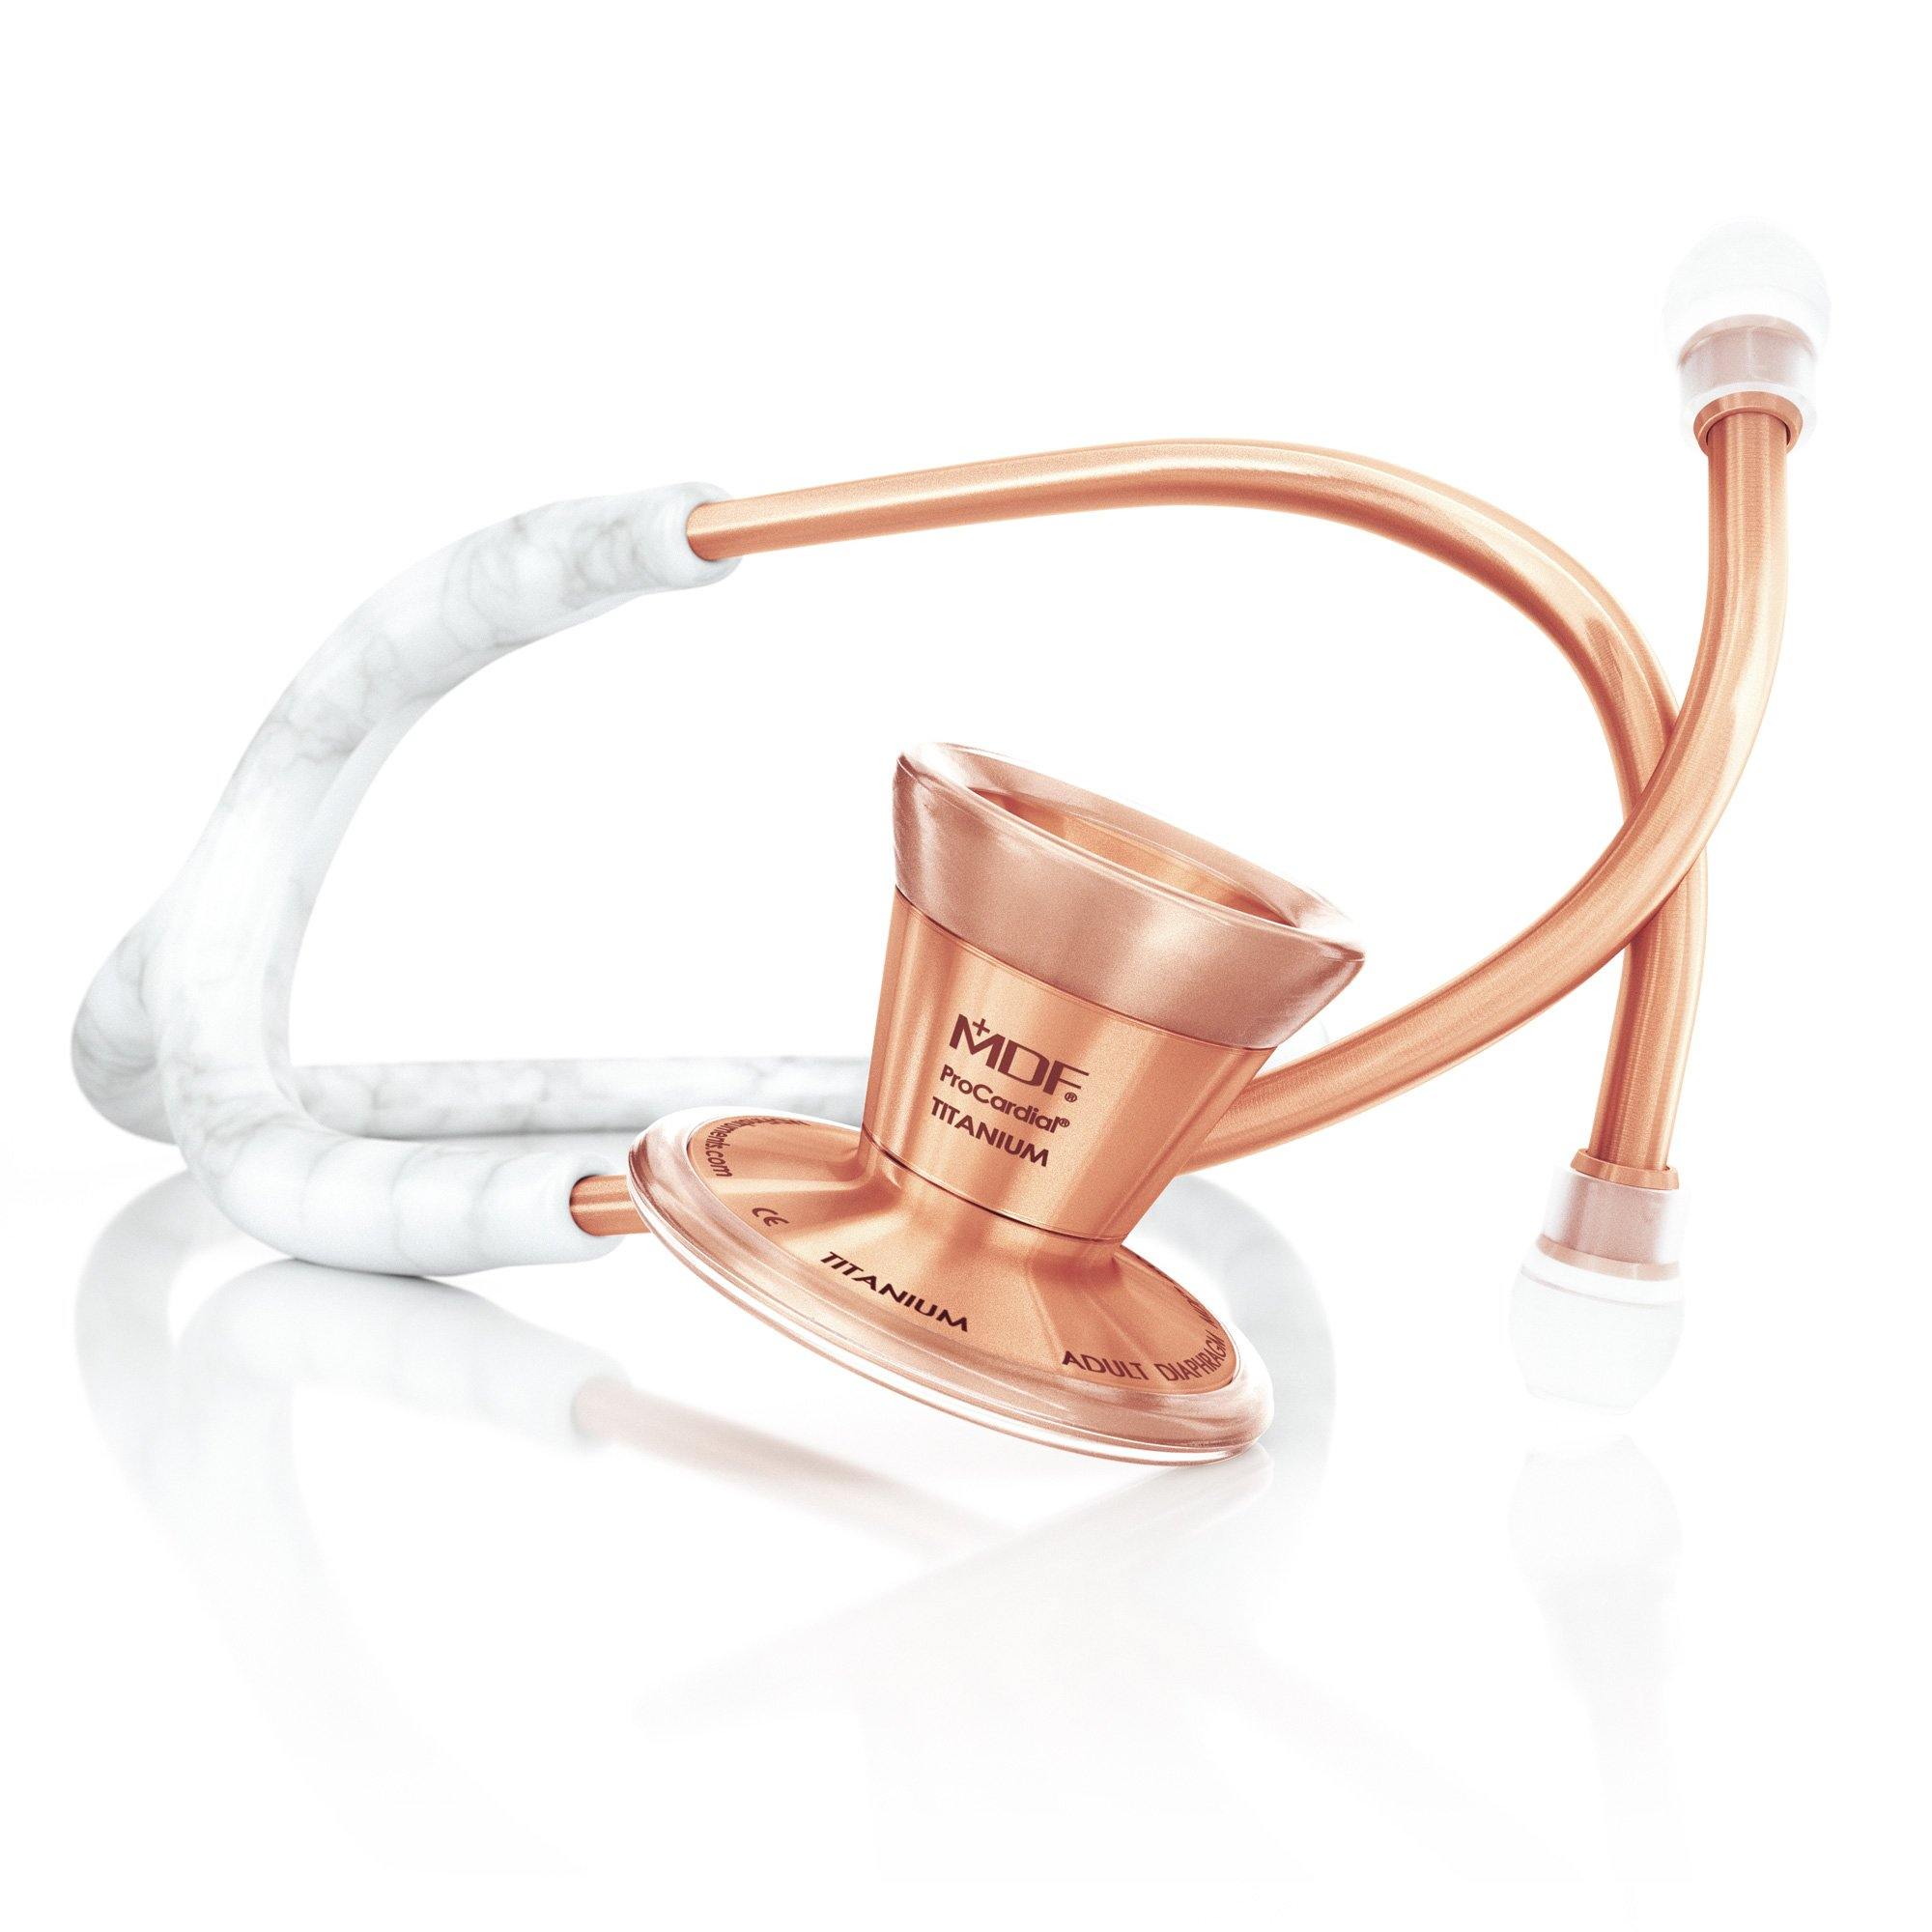 Rose Gold Stethoscope MDF Instruments ProCardial Titanium Cardiology Carrera Marble